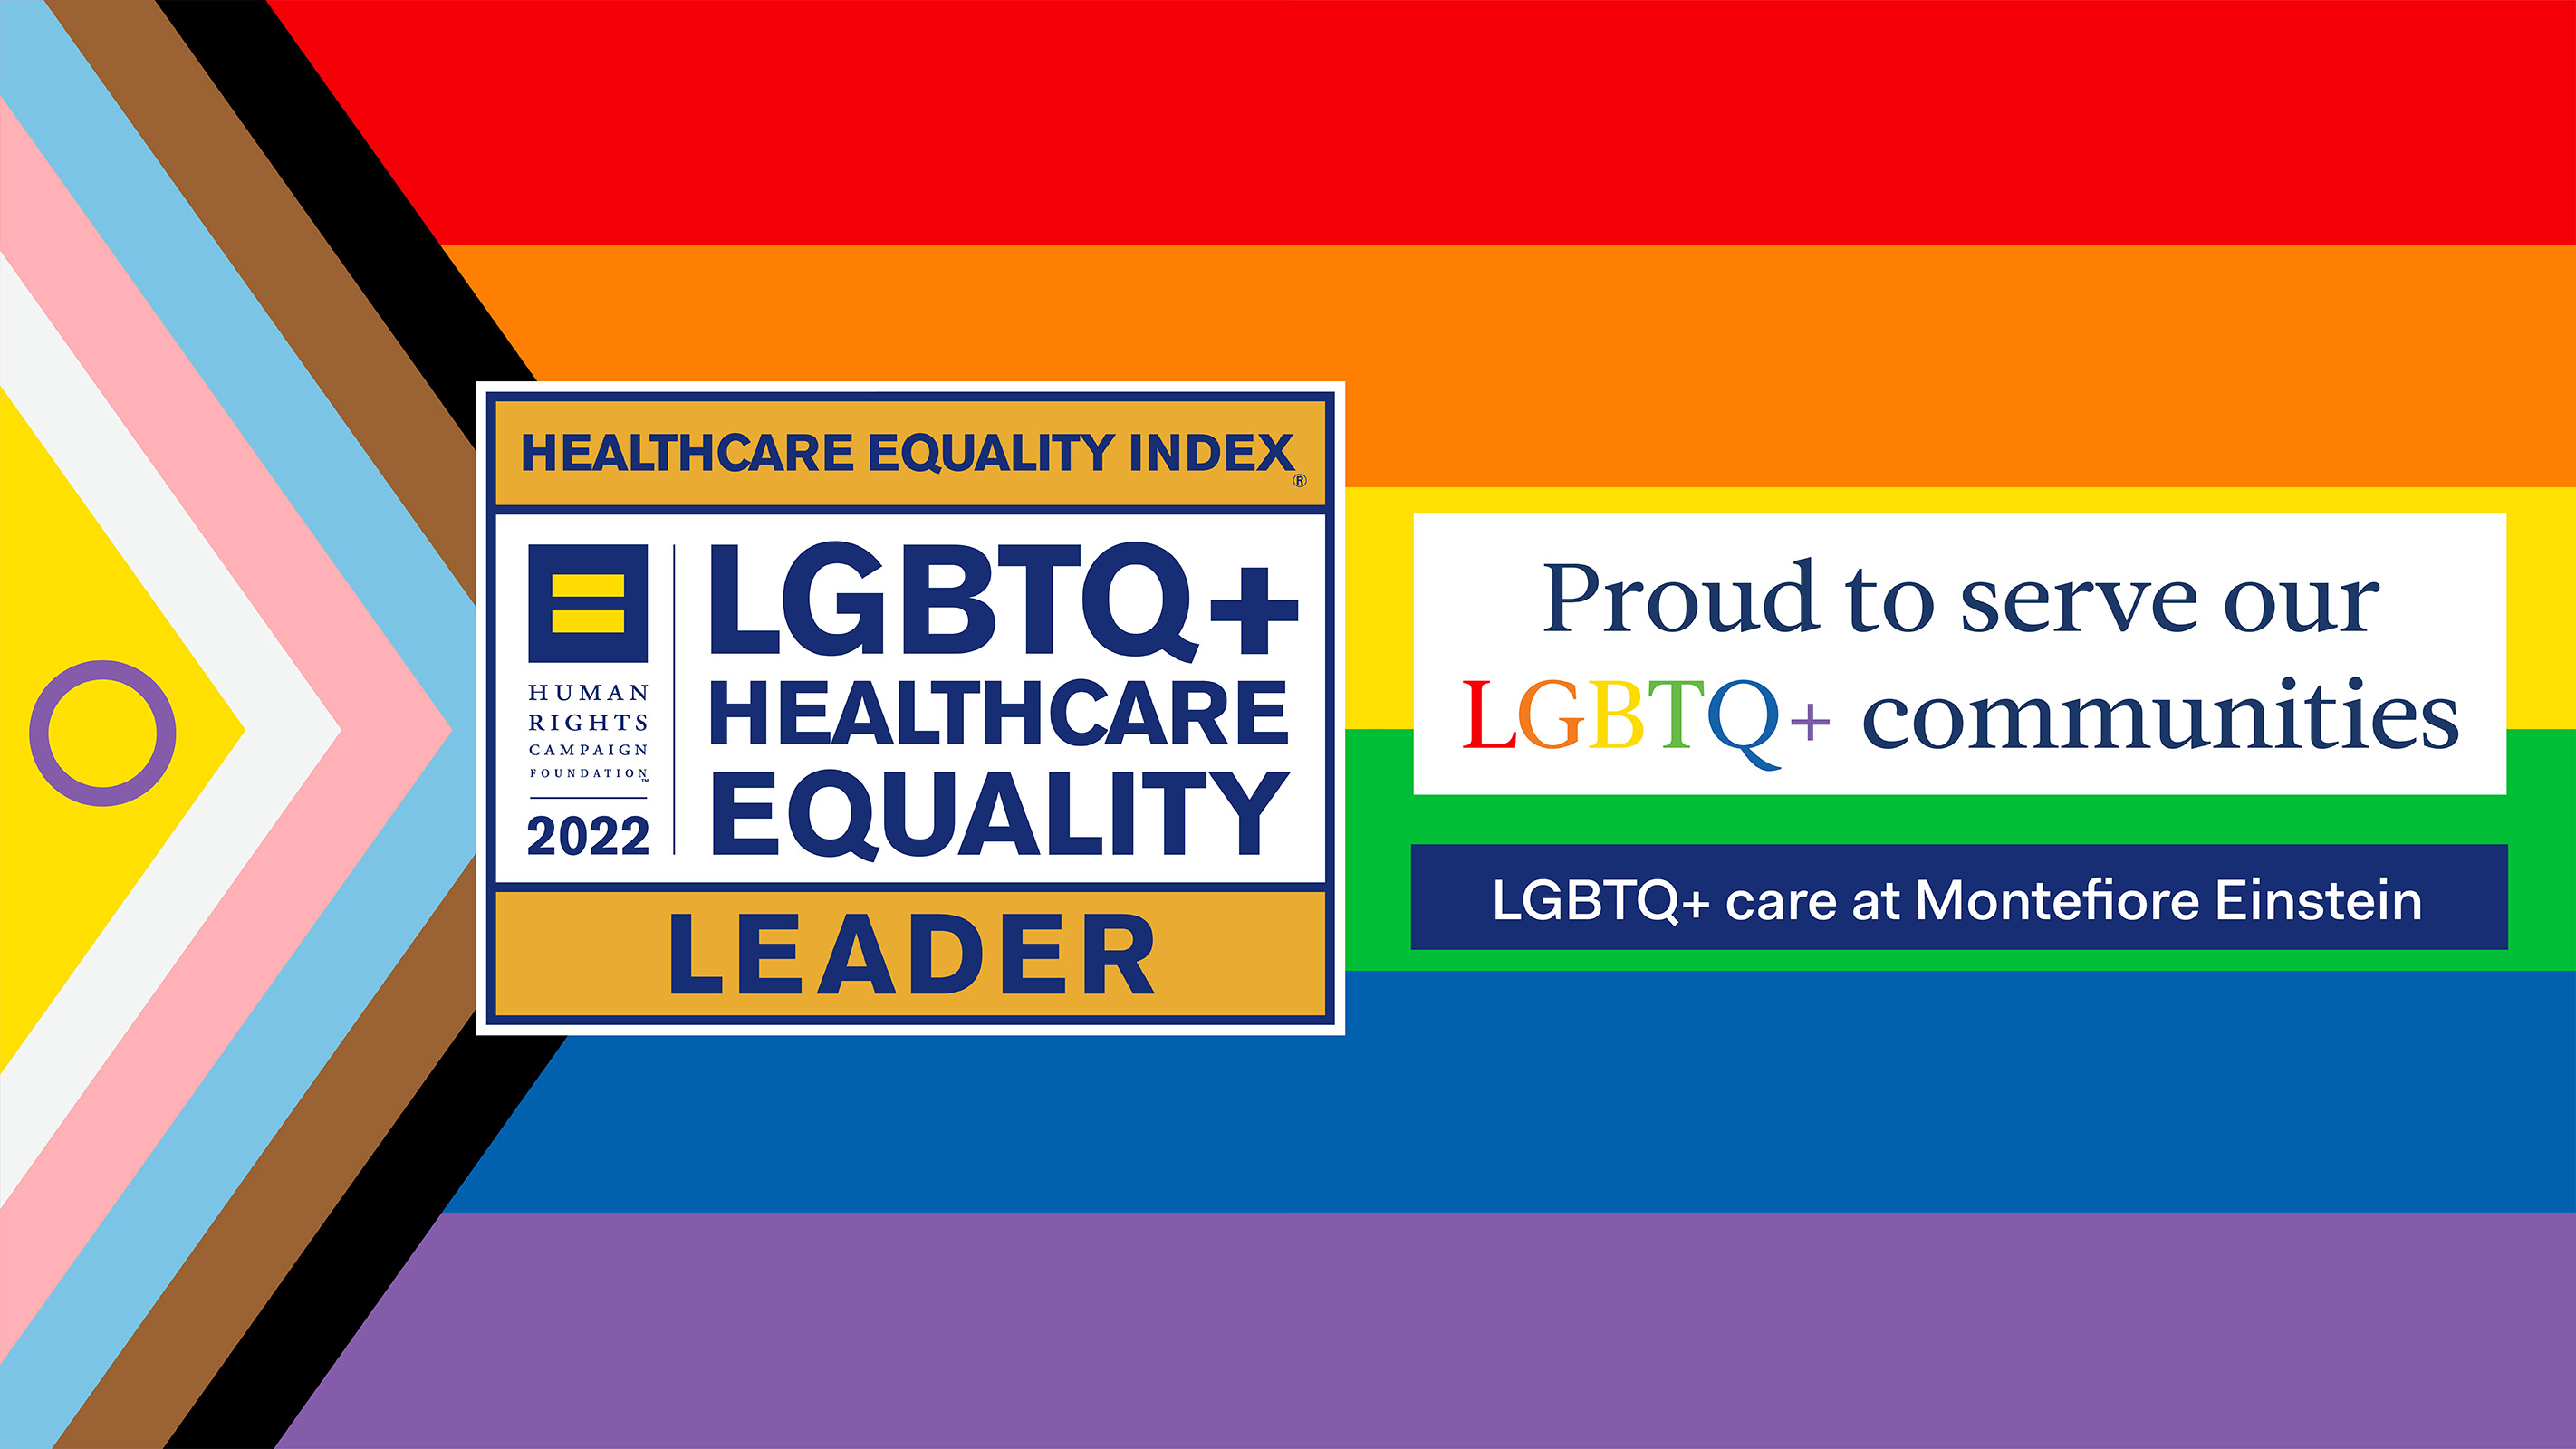 Proud to serve our LGBTQ+ communities